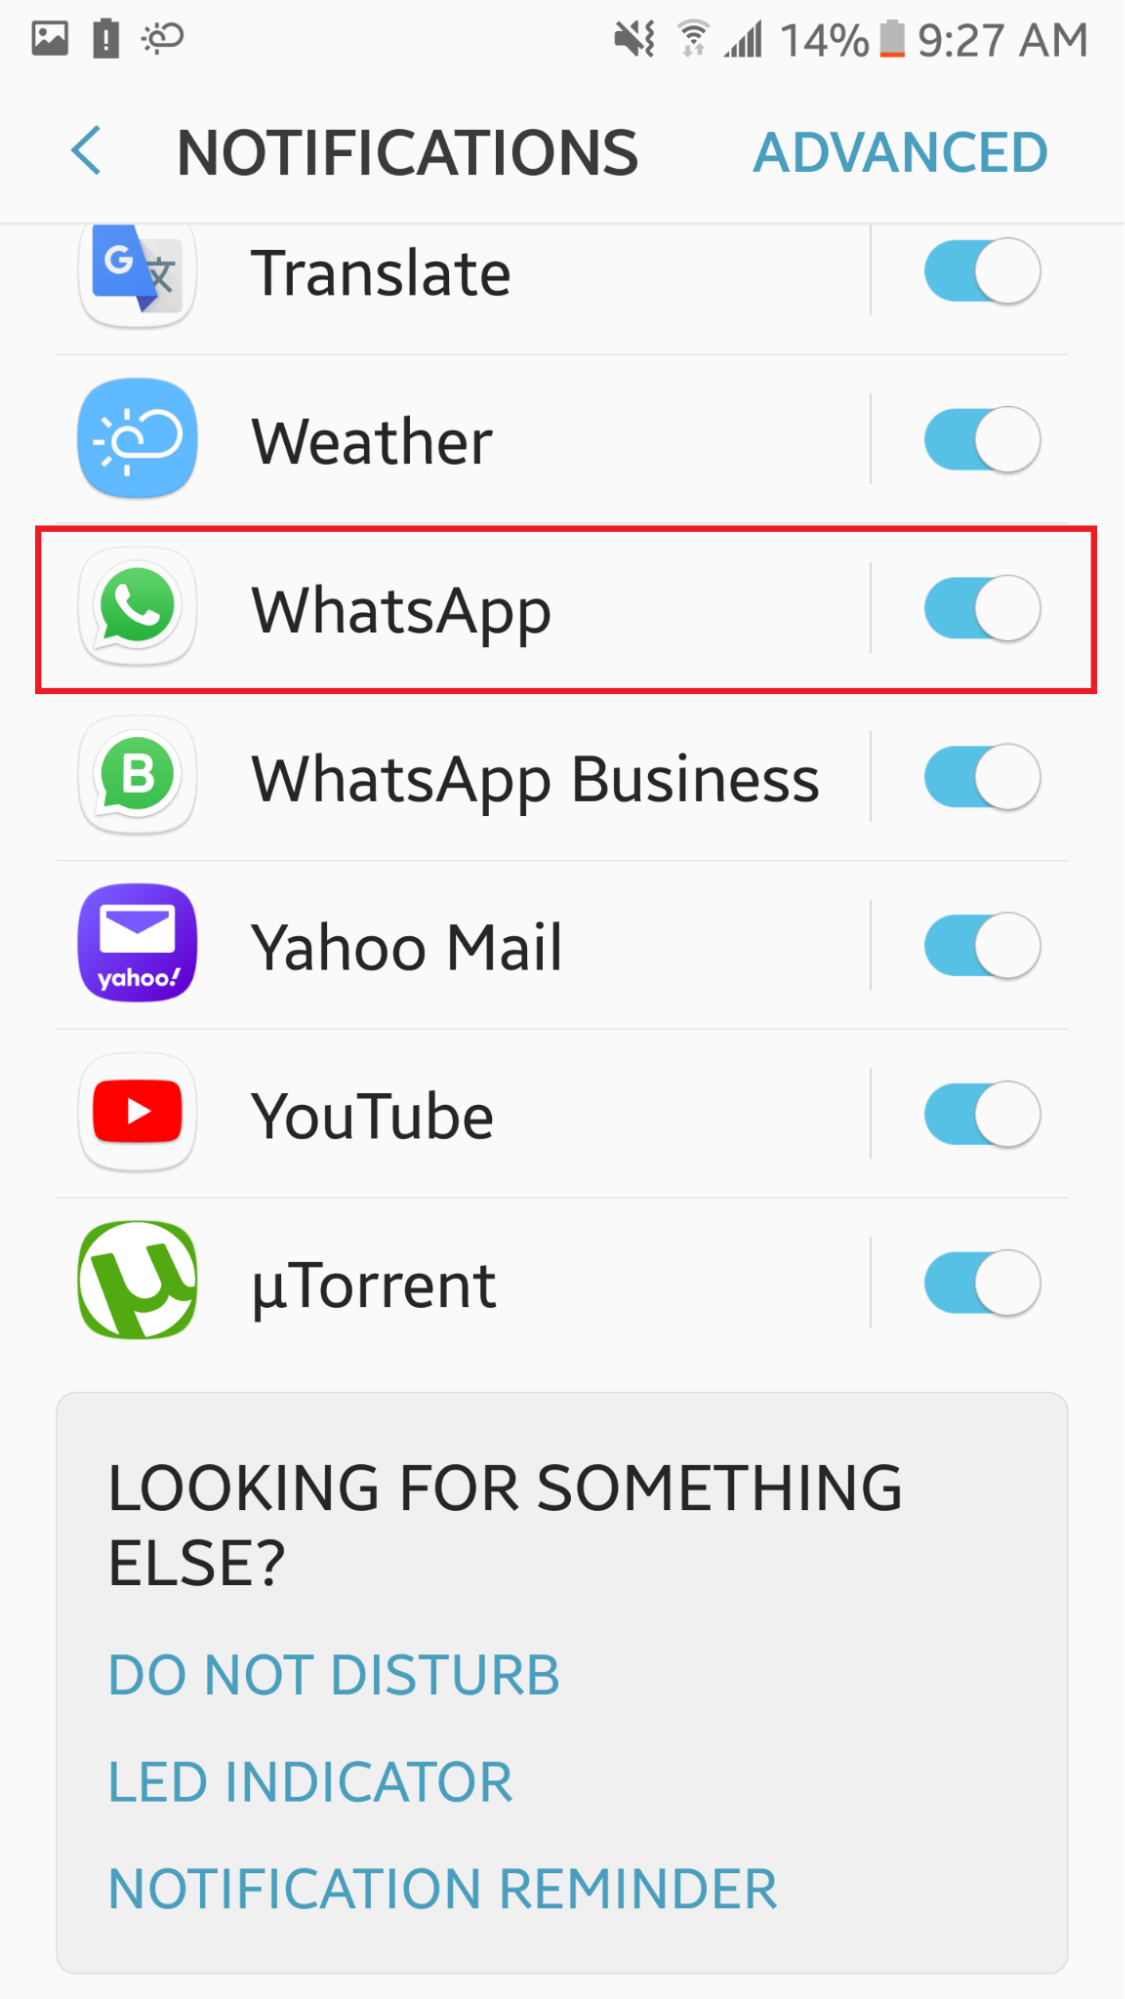 Tap the WhatsApp Toggle and Turn It On.